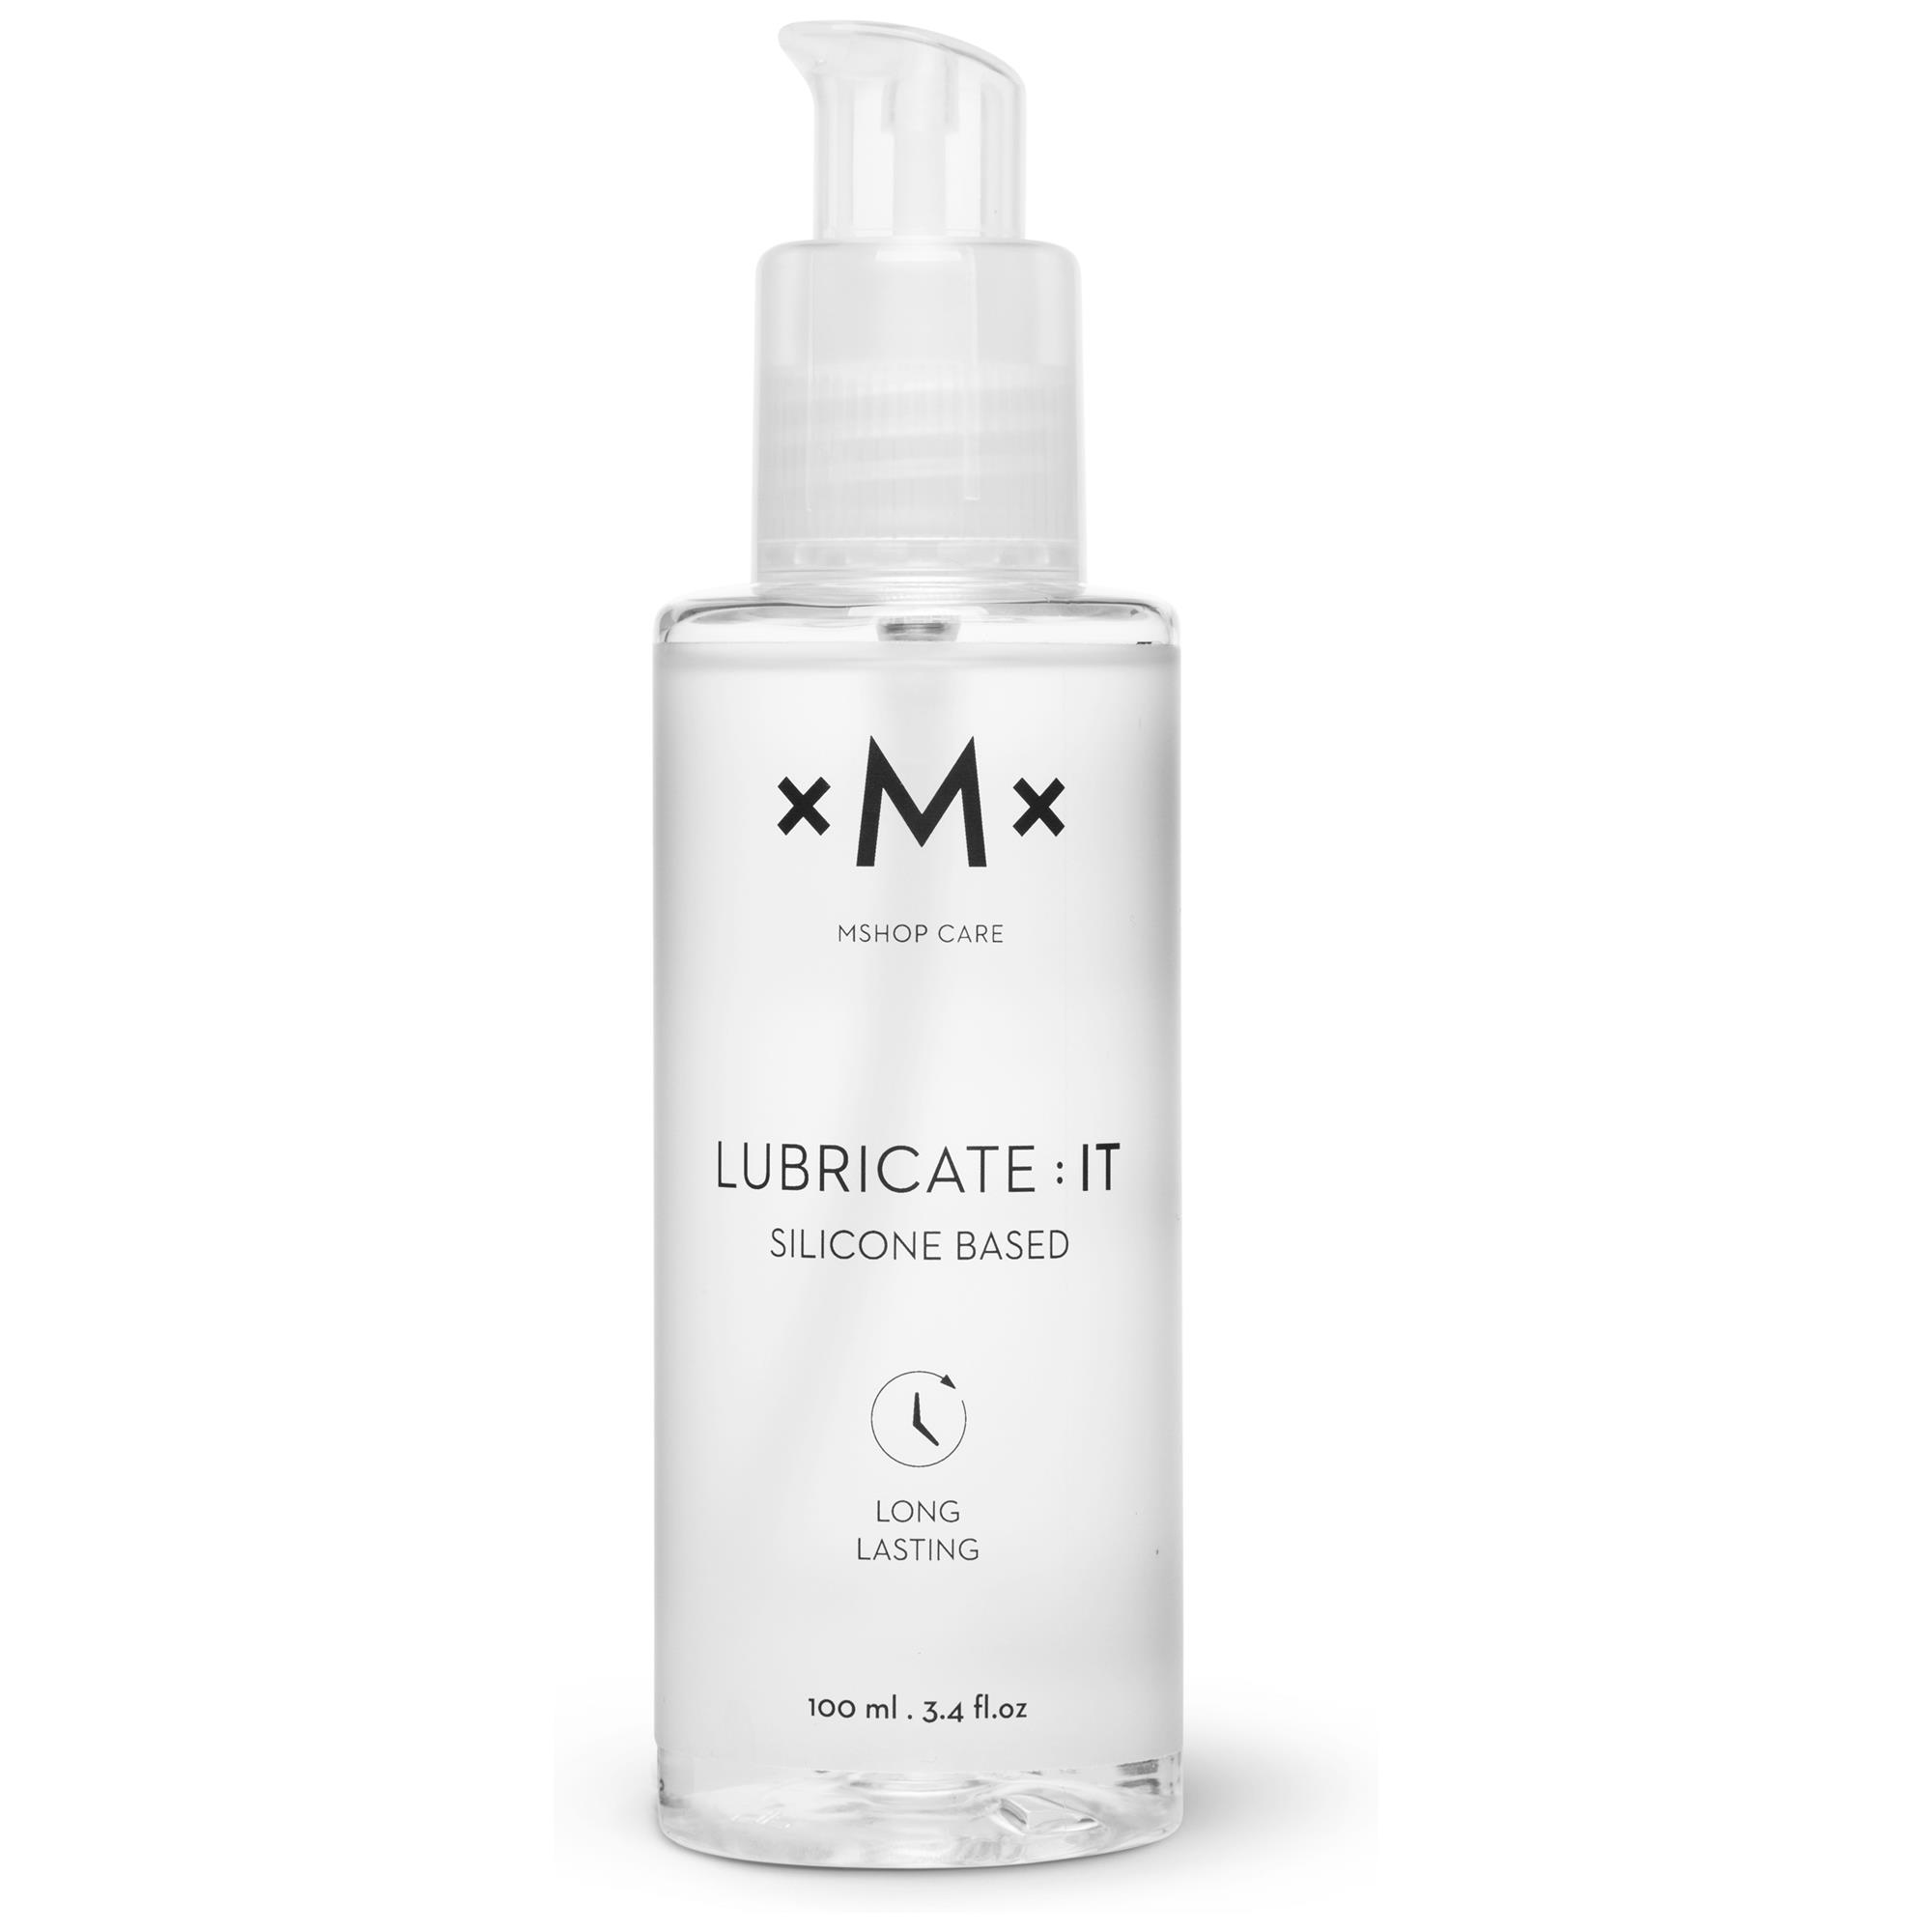 Lubricate:IT Silicone Based